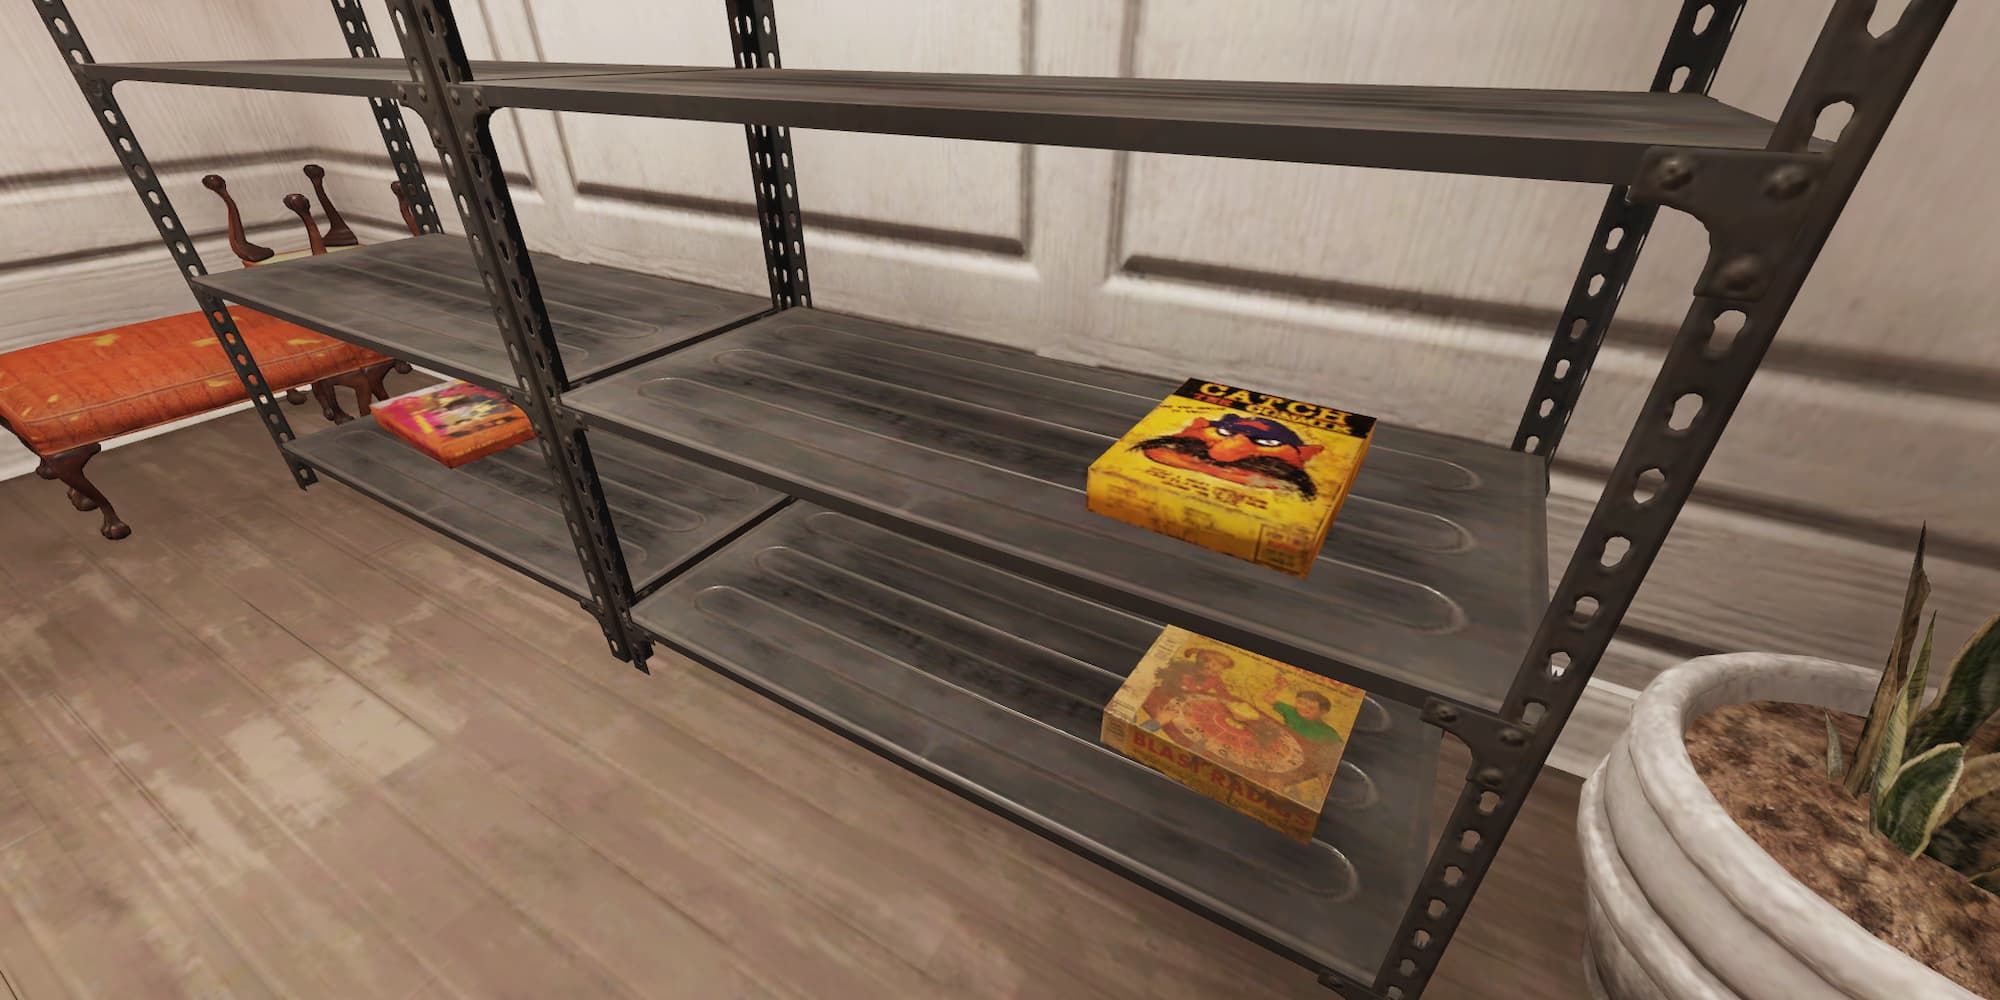 Board games sitting on some shelves in Fallout 76